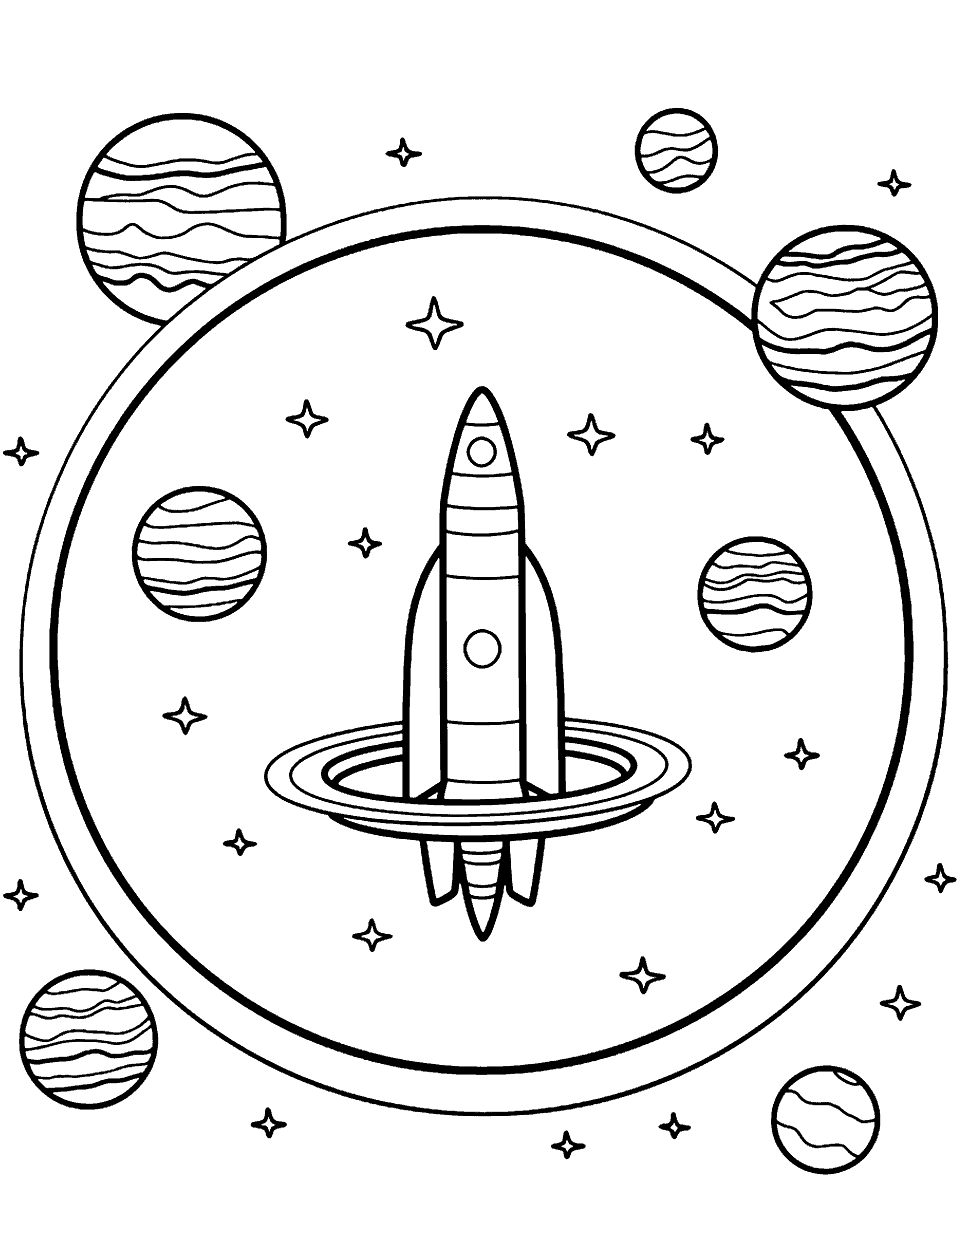 Space Shuttle Adventure Solar System Coloring Page - A space shuttle with a view of space.